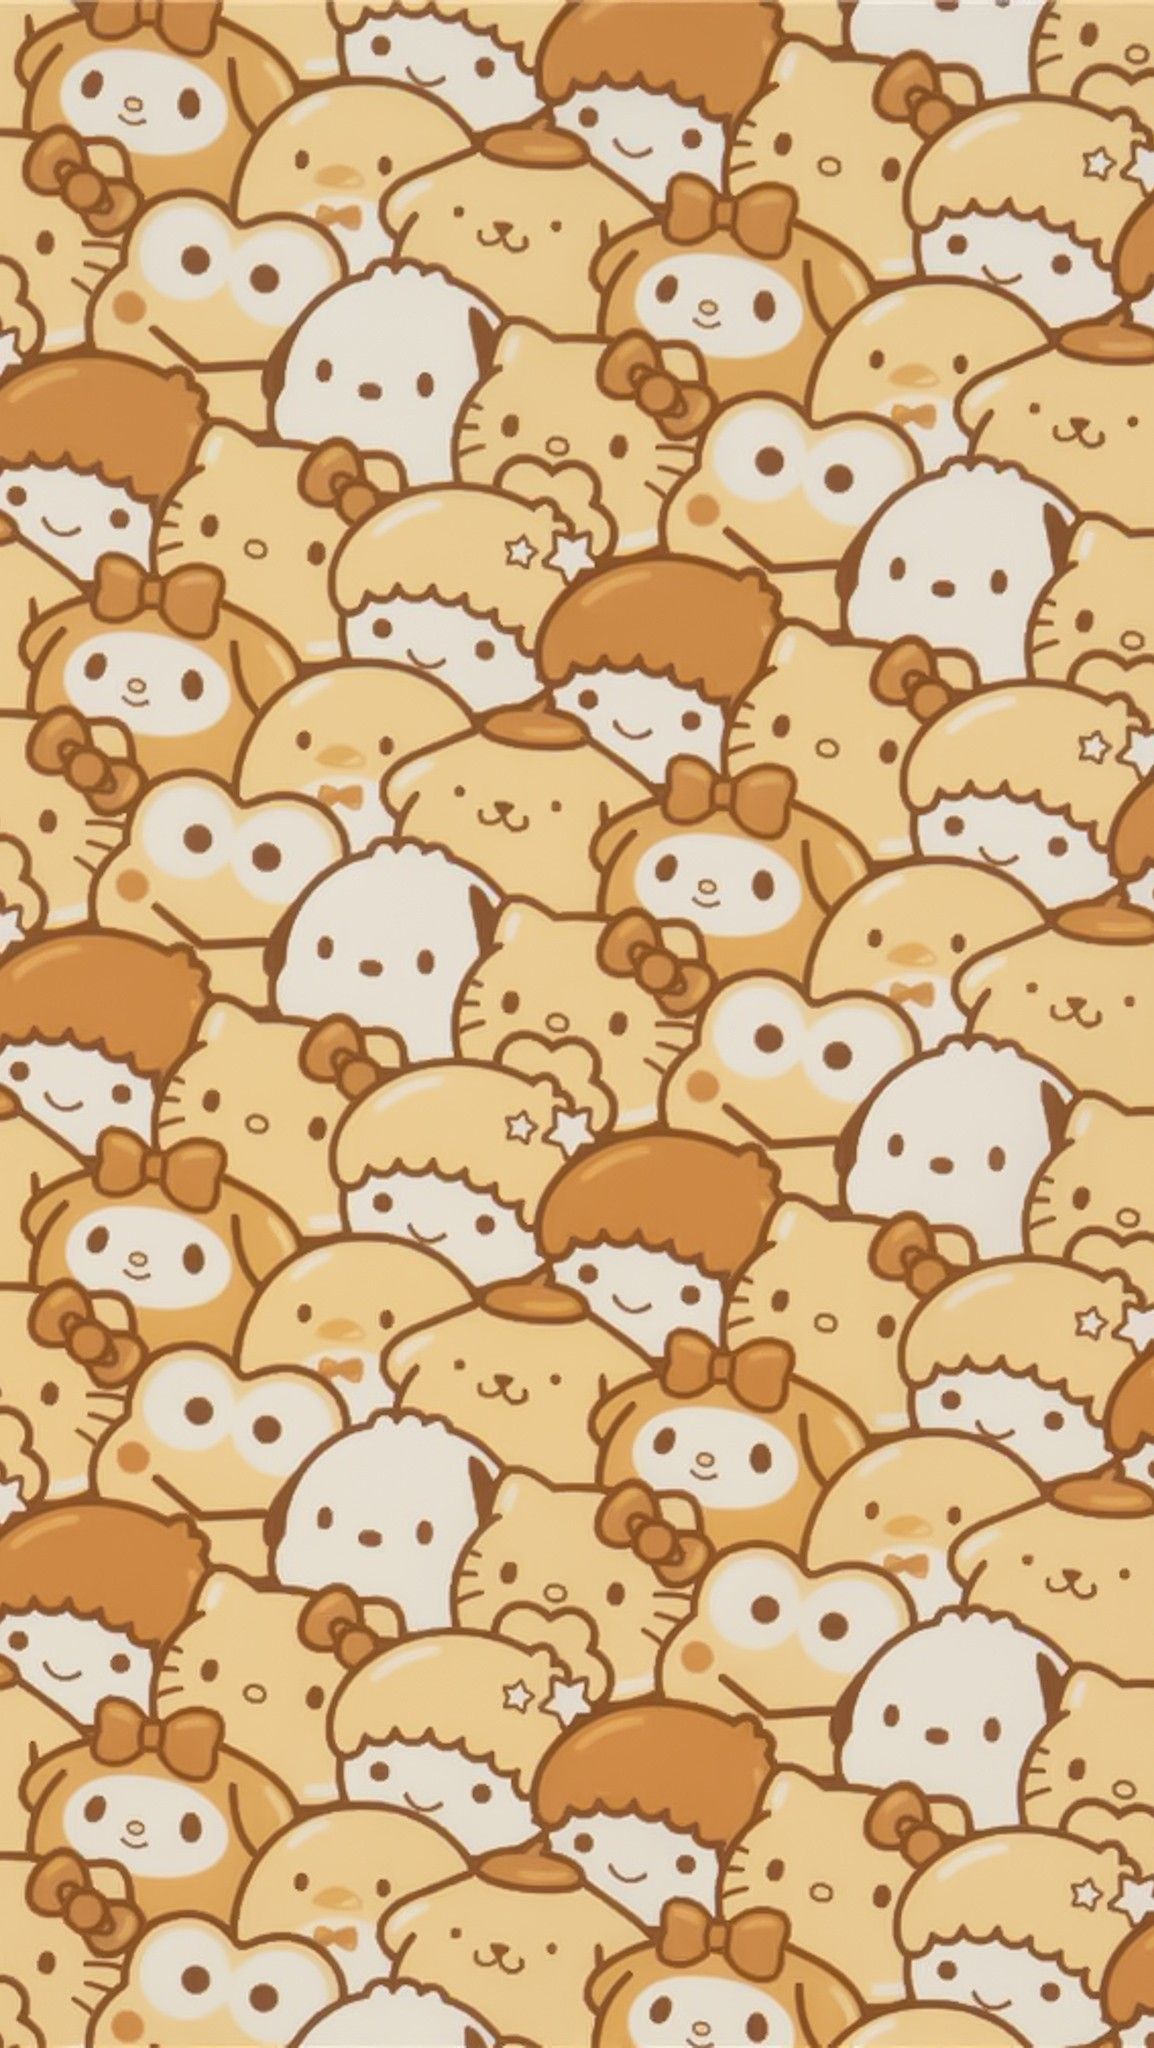 Cute animal wallpaper for iPhone with high-resolution 1080x1920 pixel. You can use this wallpaper for your iPhone 5, 6, 7, 8, X, XS, XR backgrounds, Mobile Screensaver, or iPad Lock Screen - Hello Kitty, Sanrio